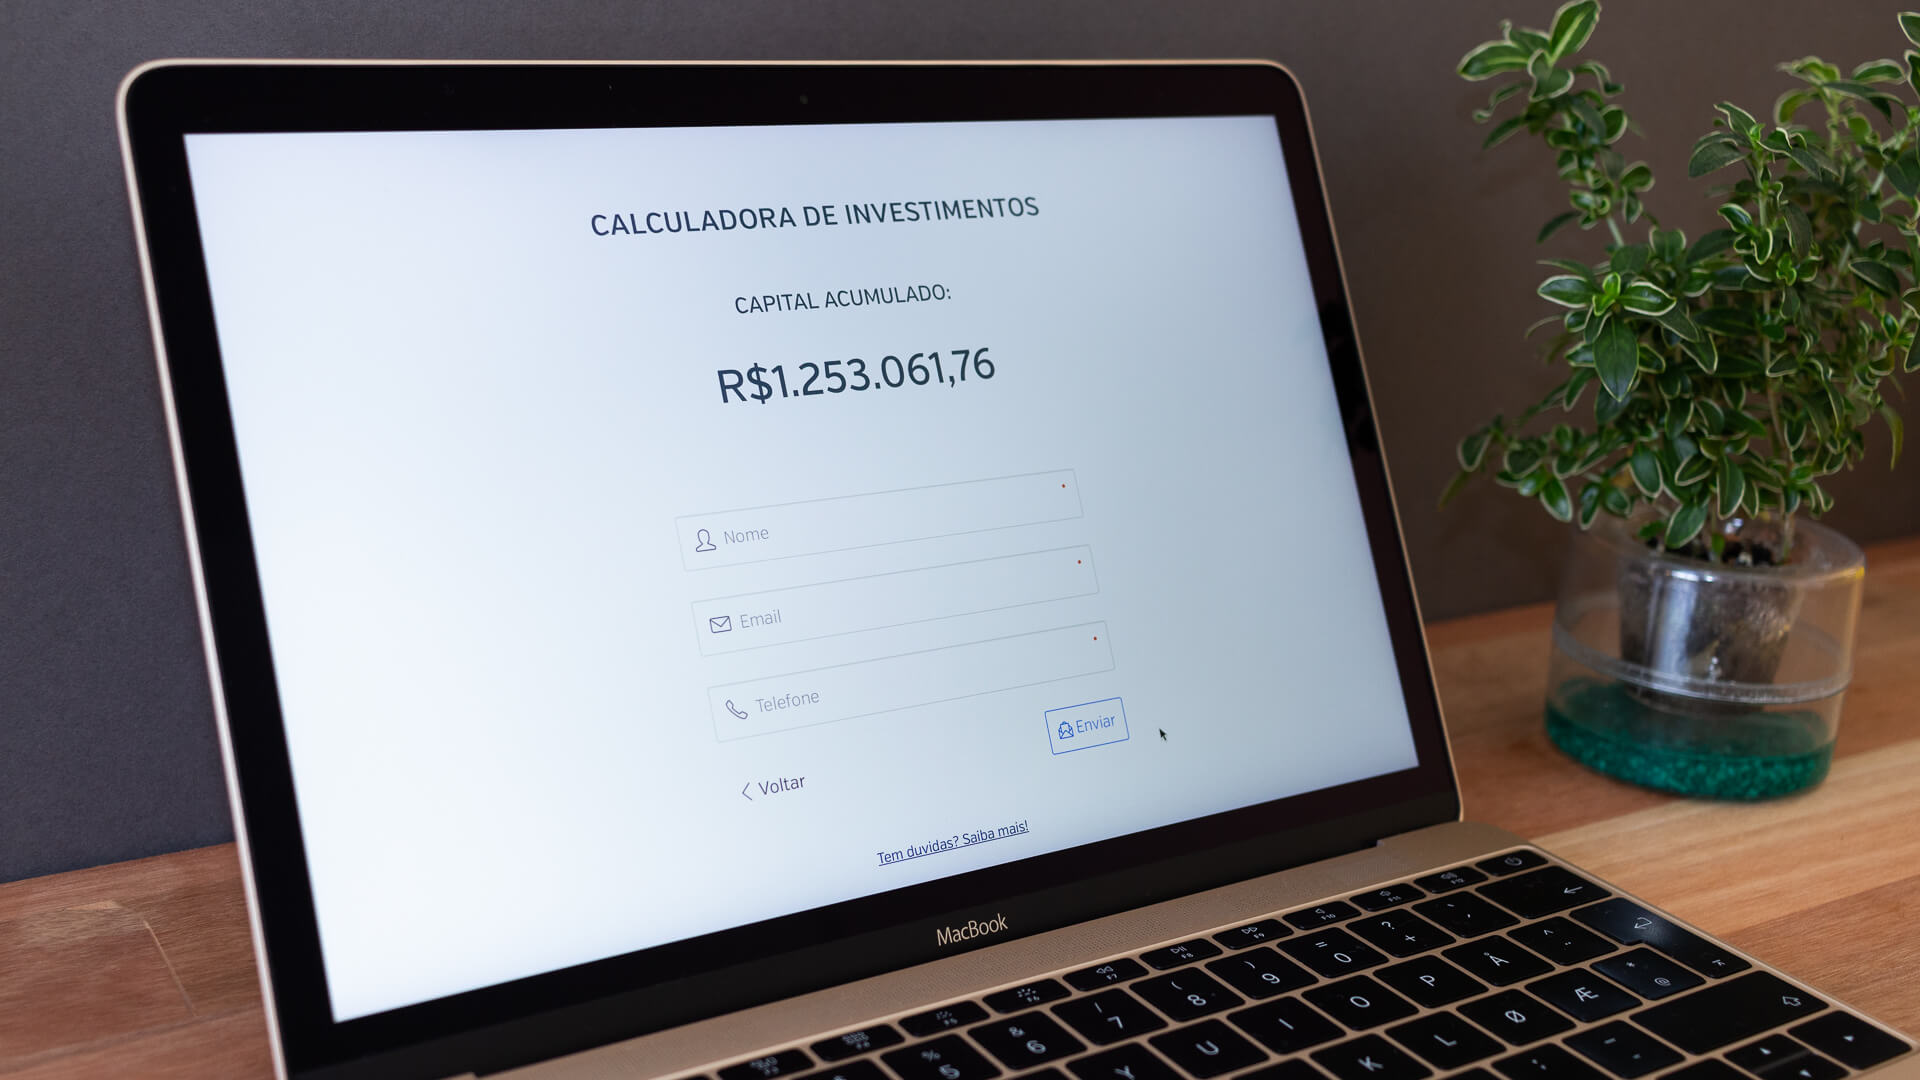 Step #2 of the investment calculator.